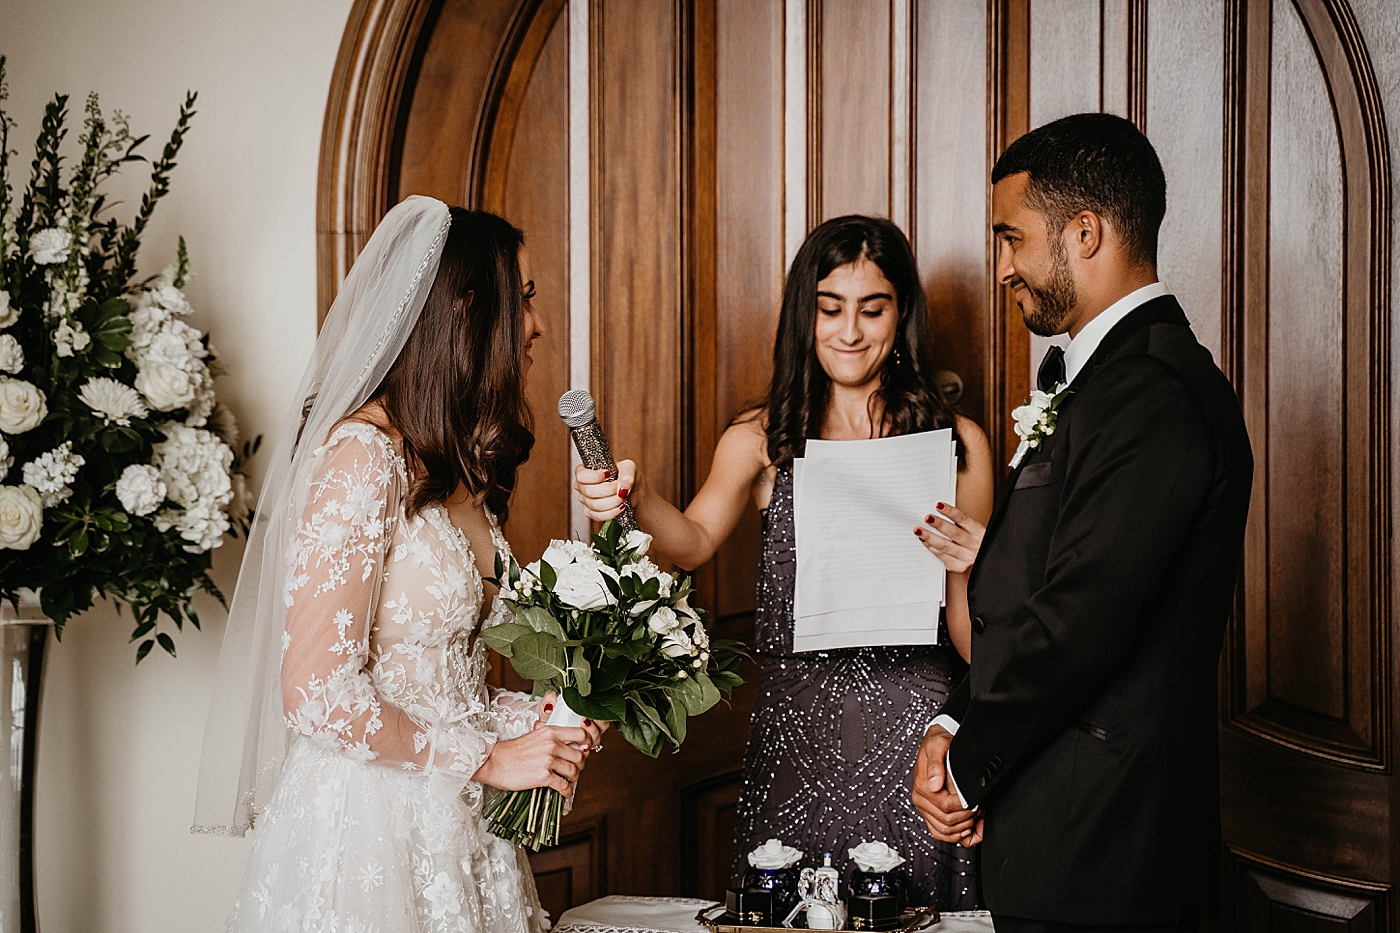 Bride and Groom saying I do Ceremony Intimate Home Wedding captured by South Florida Wedding Photographer Krystal Capone Photography